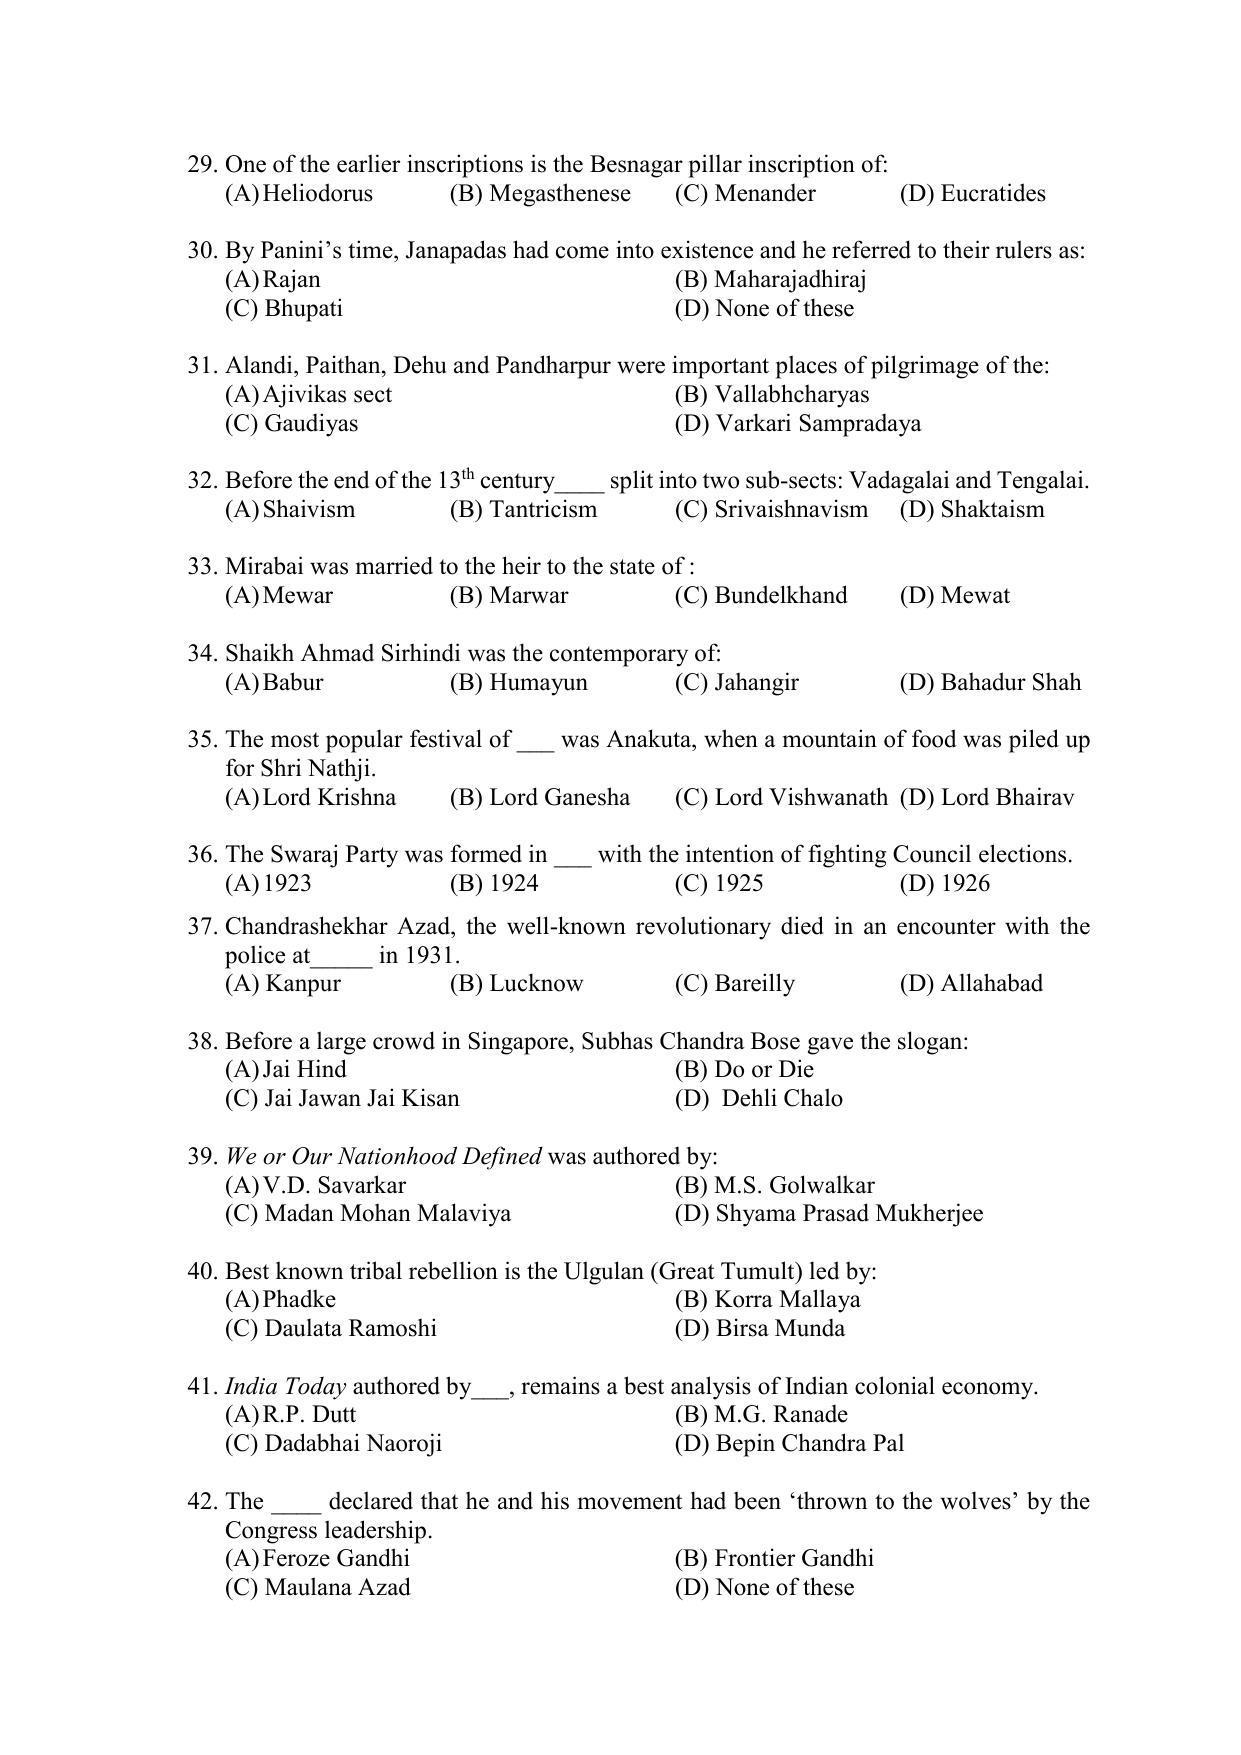 PU MPET Ancient Indian History & Archeology 2022 Question Papers - Page 20